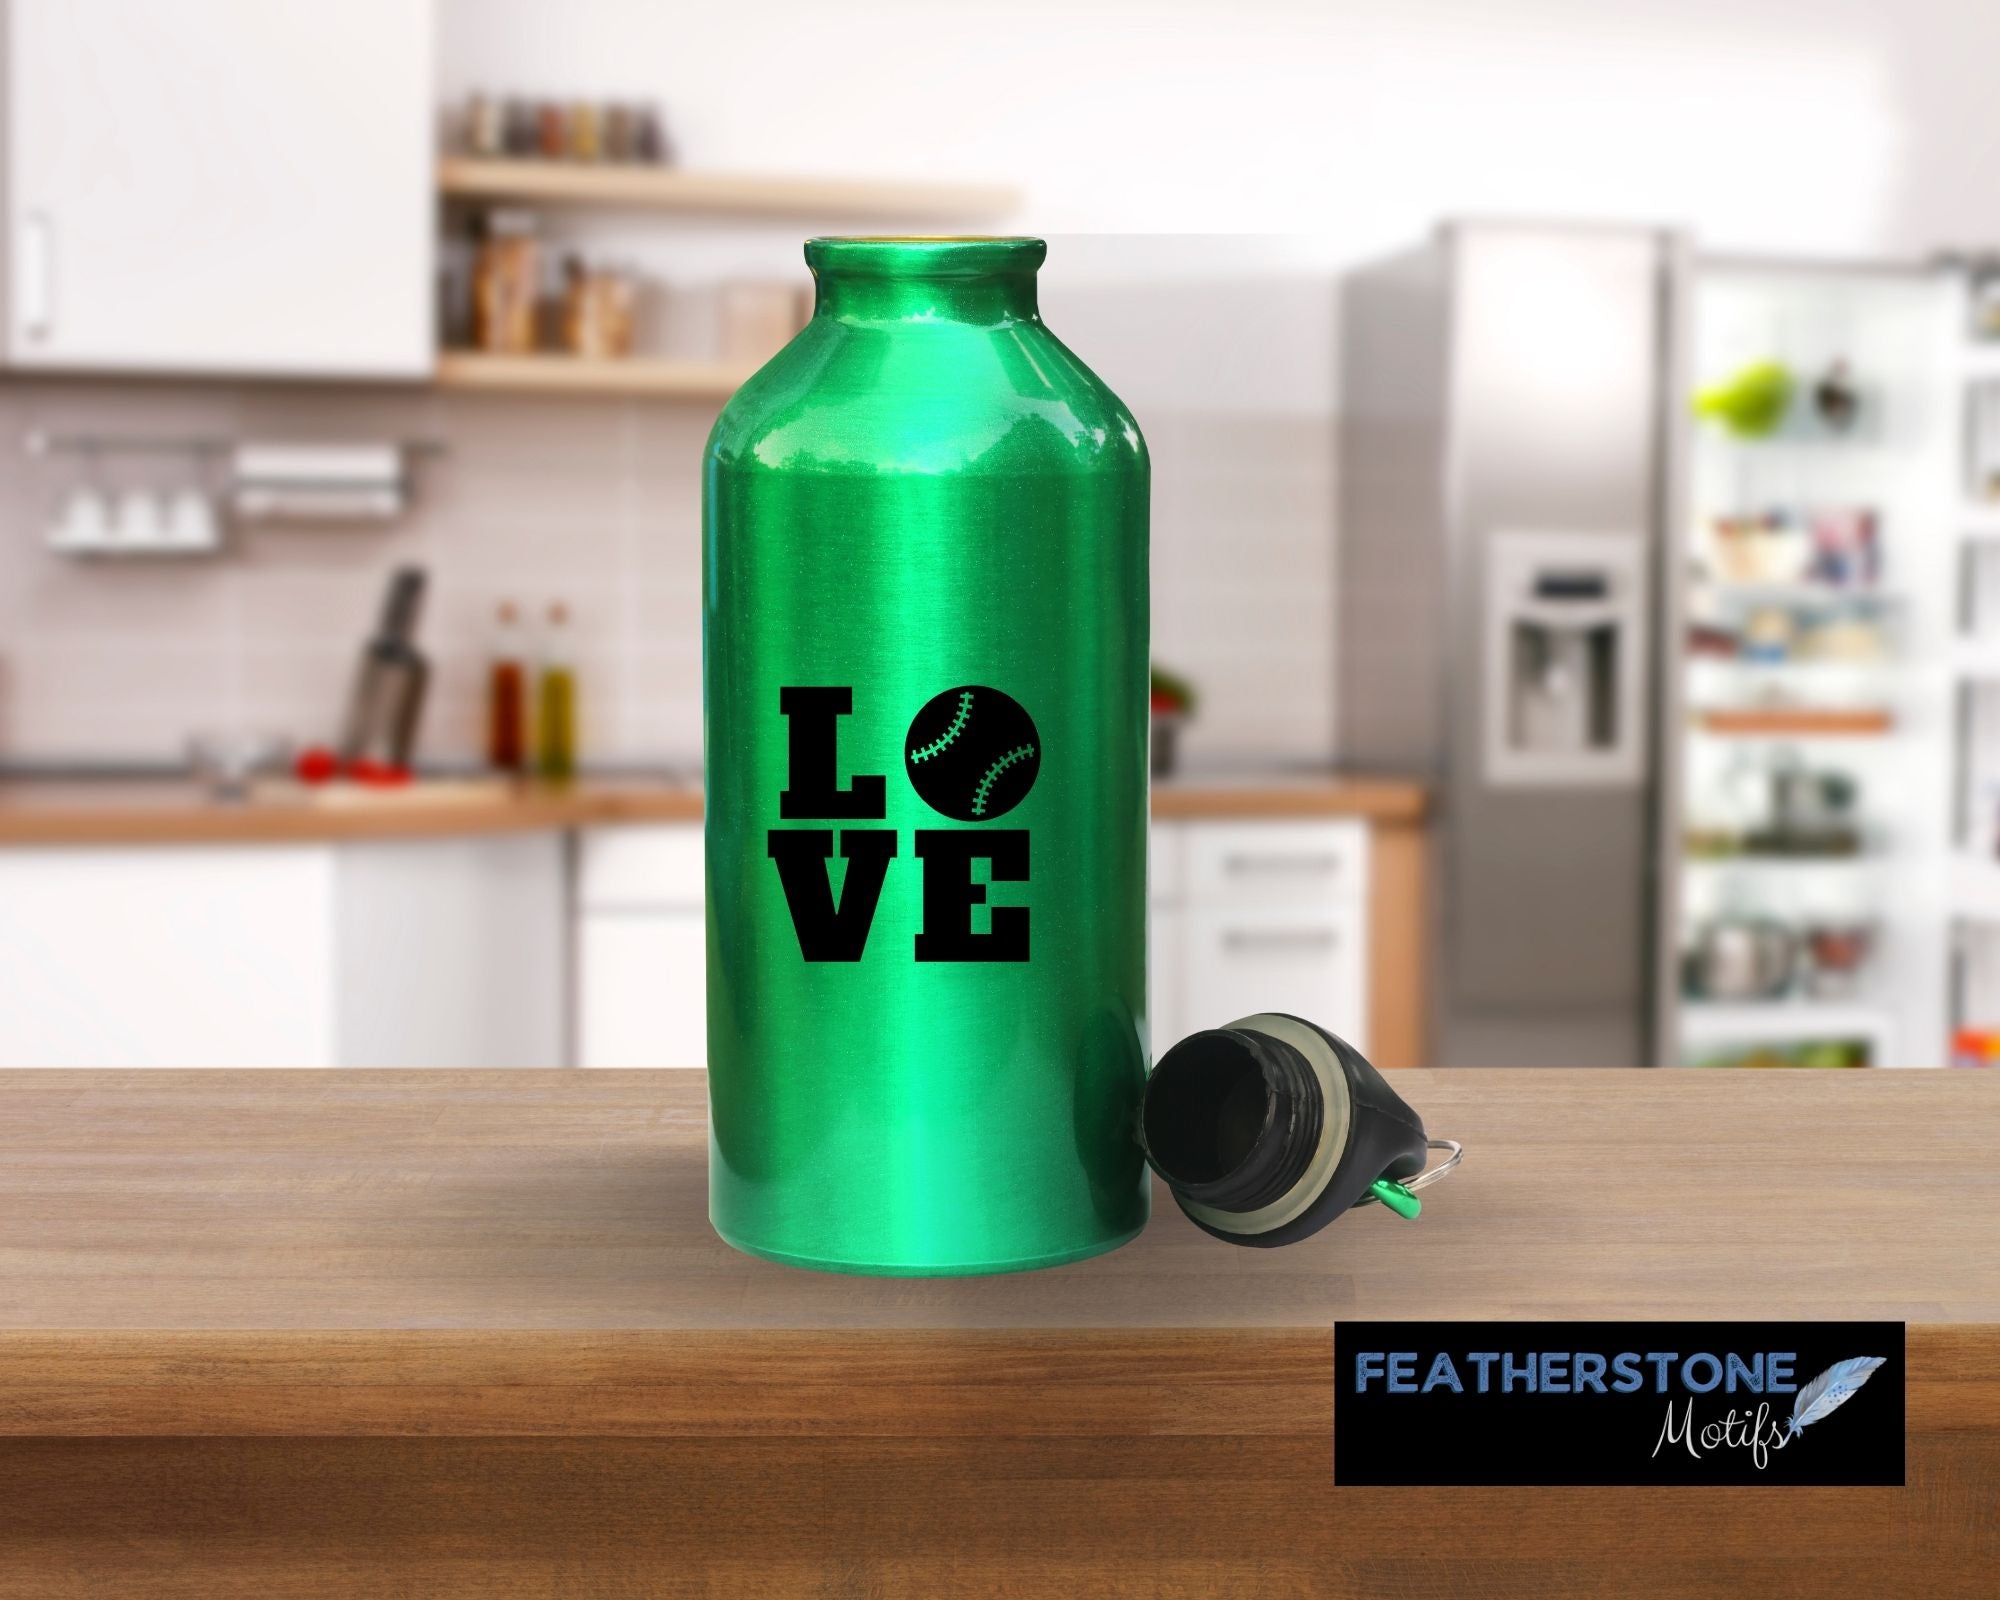 Love baseball? Then show it with this baseball love square vinyl decal! Available in 4 sizes and 10 colors, these vinyl decals make great gifts for everyone. This image shows the baseball love square decal on a water bottle. 